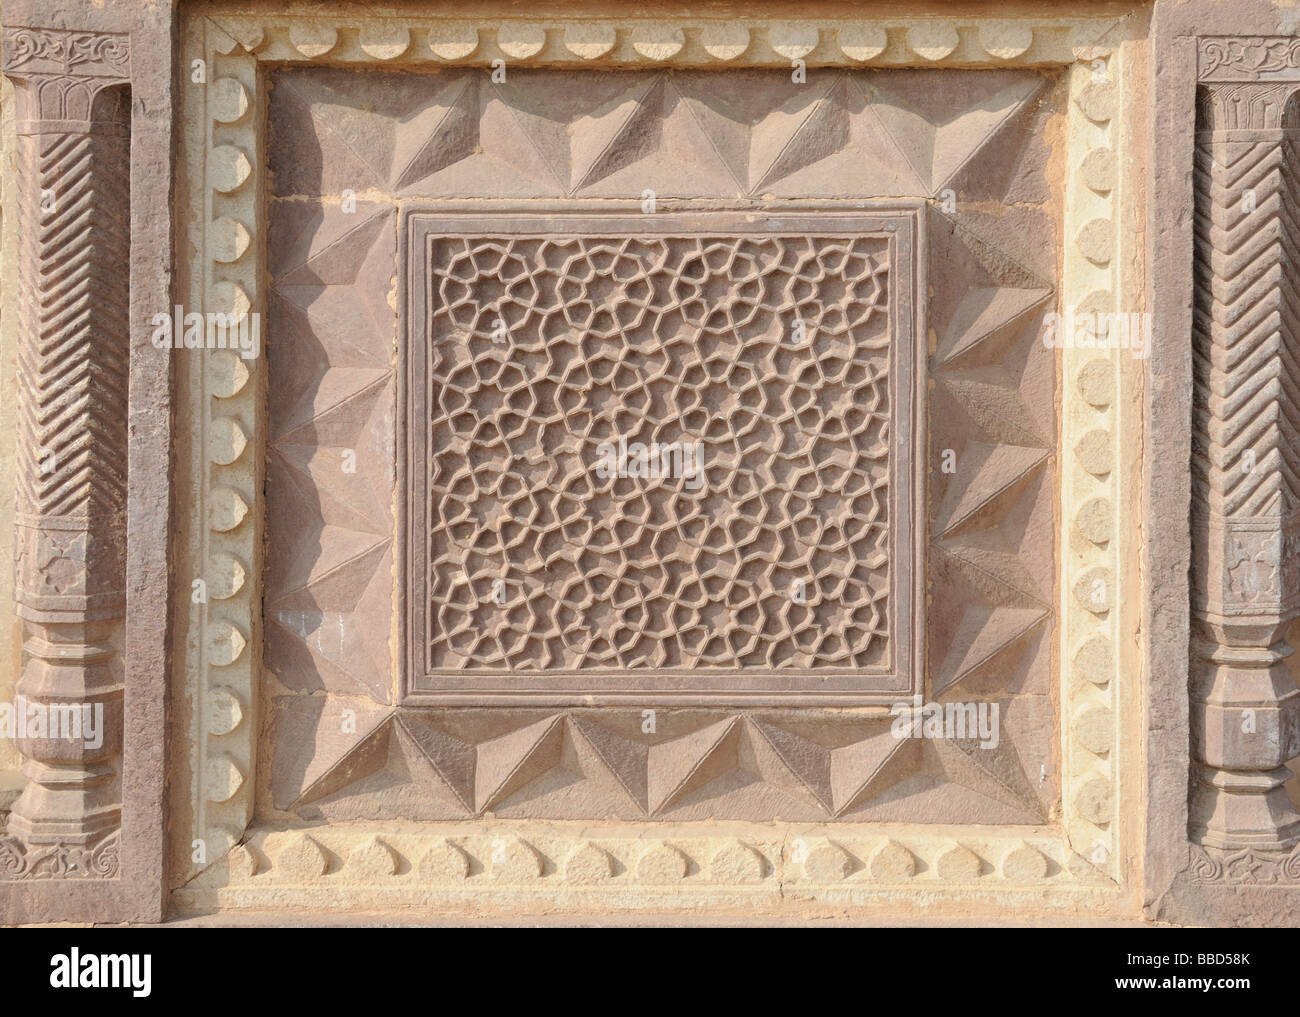 A decorative stone panel carved with pentagons, eight-pointed stars and other shapes. Jahangir Mahal (Palace) at Orchha. Stock Photo